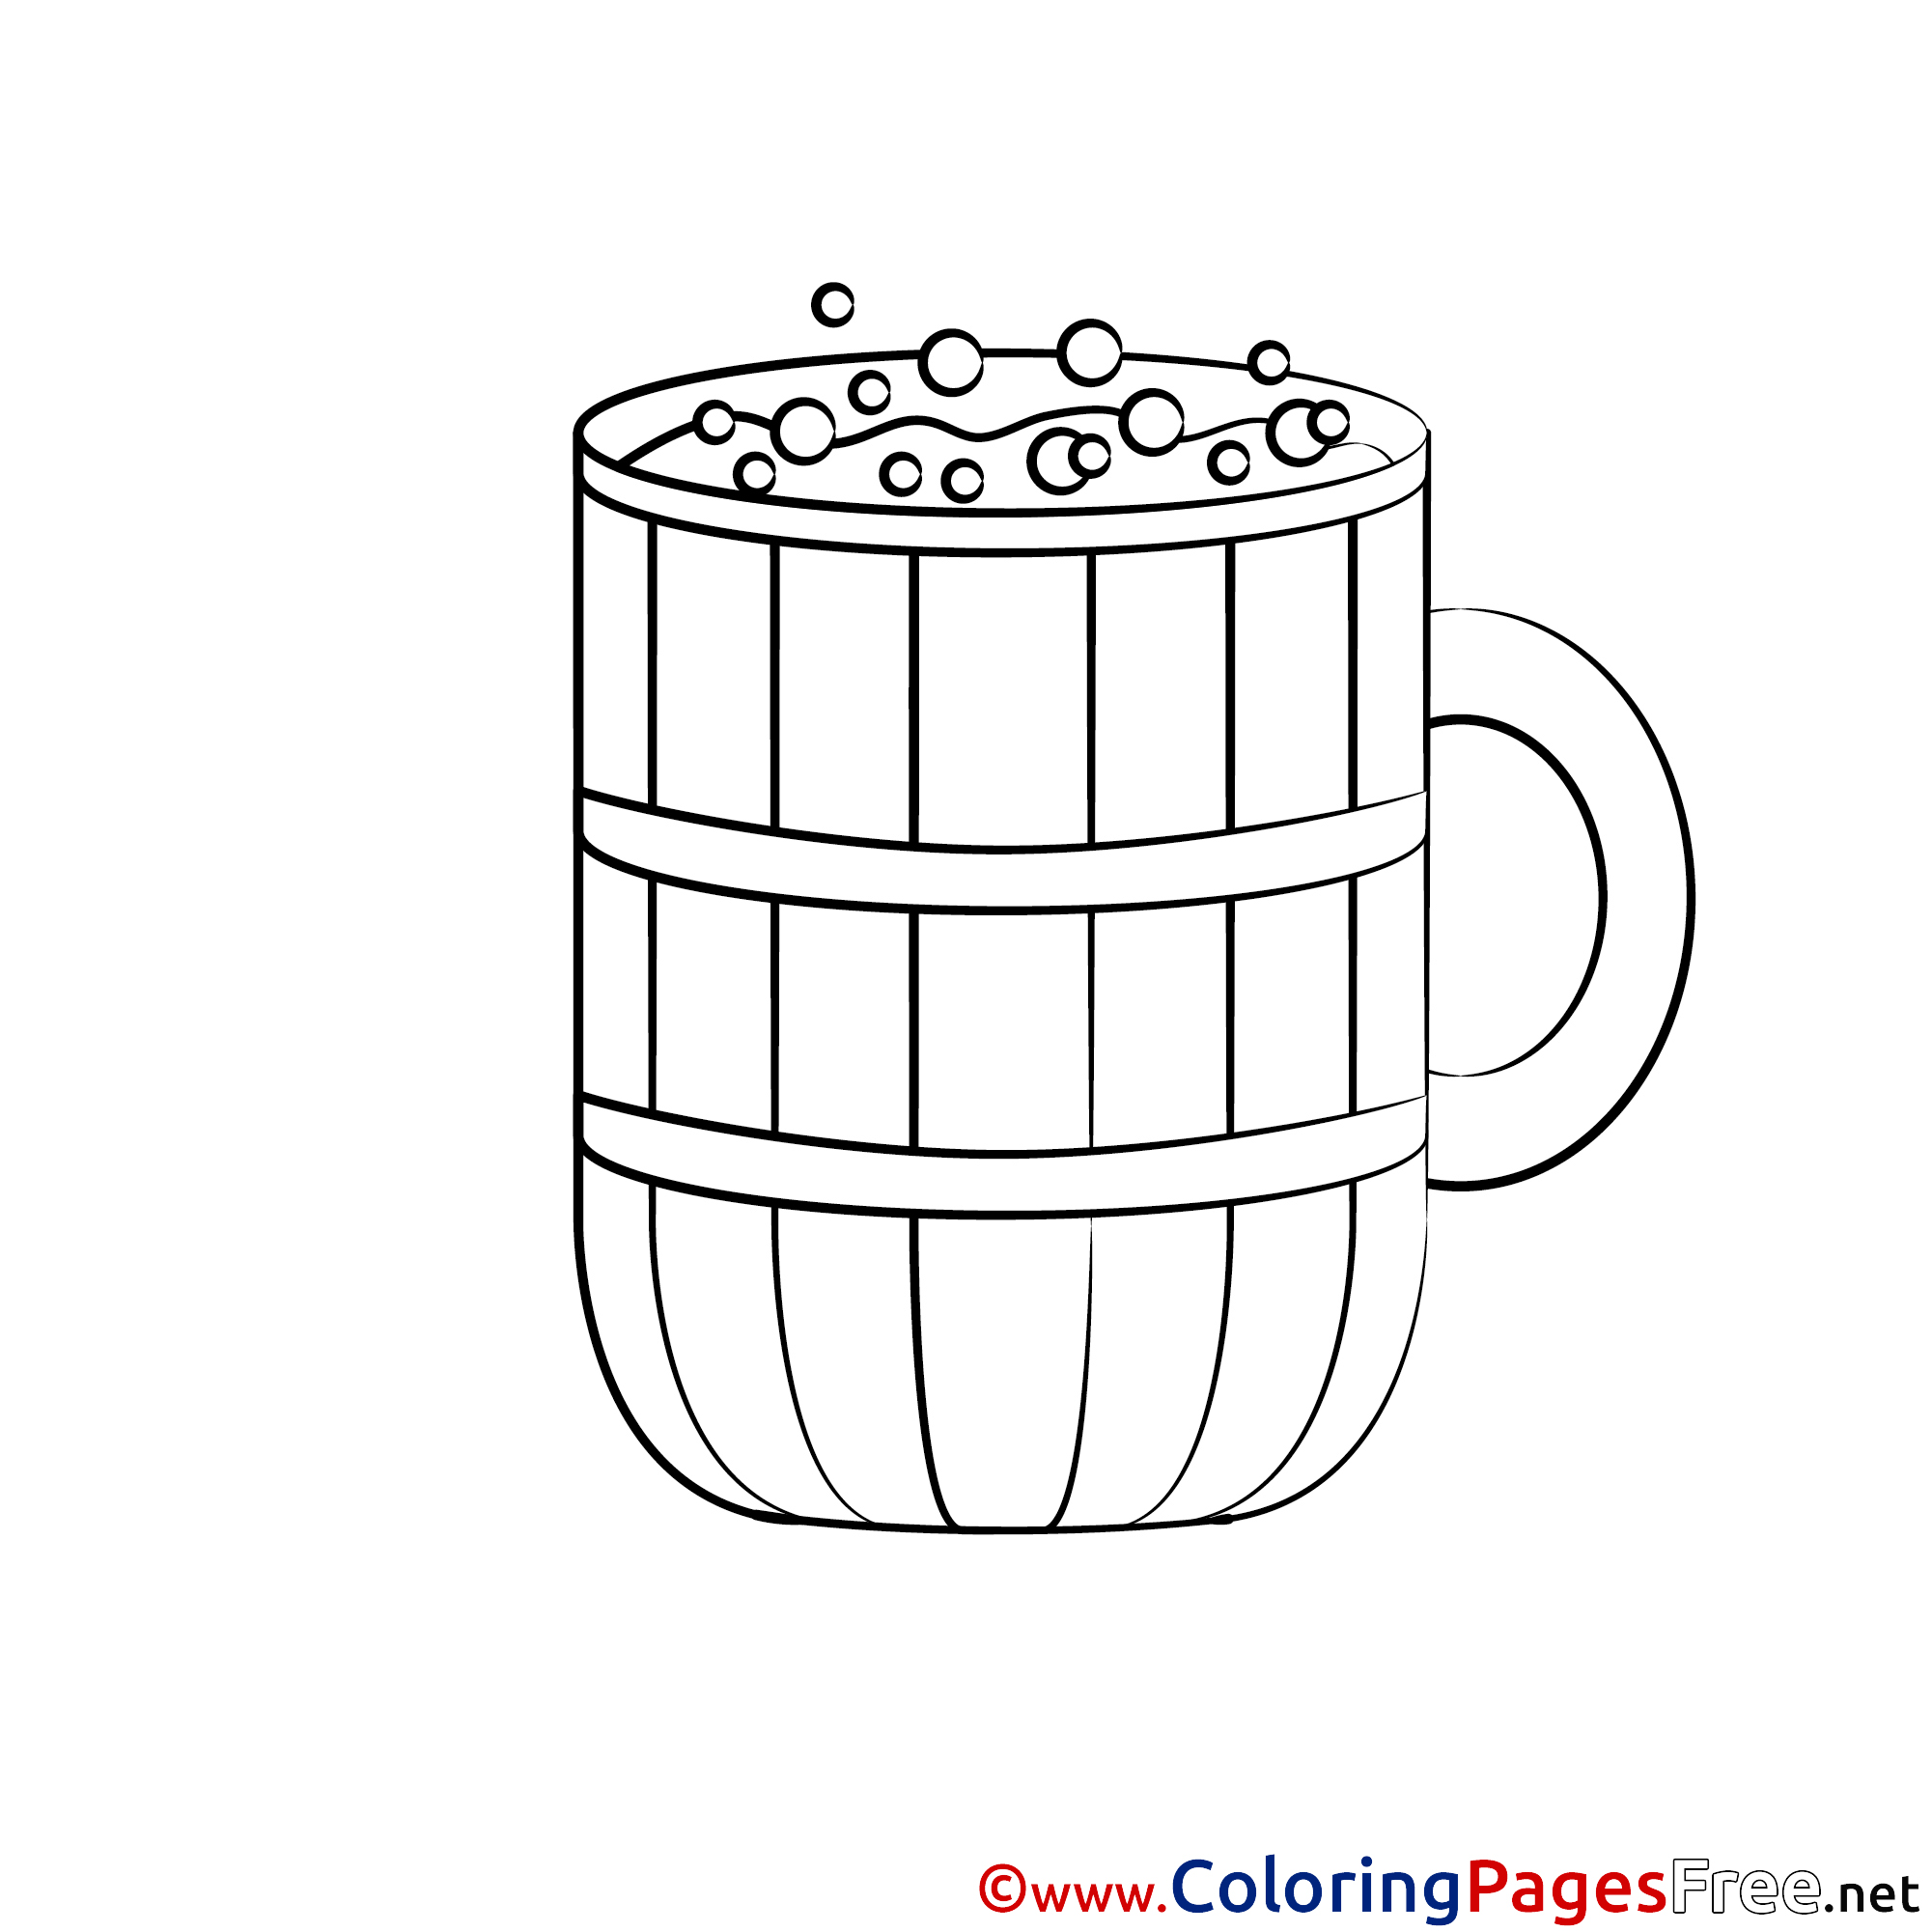 Beer Mug for free Coloring Pages download